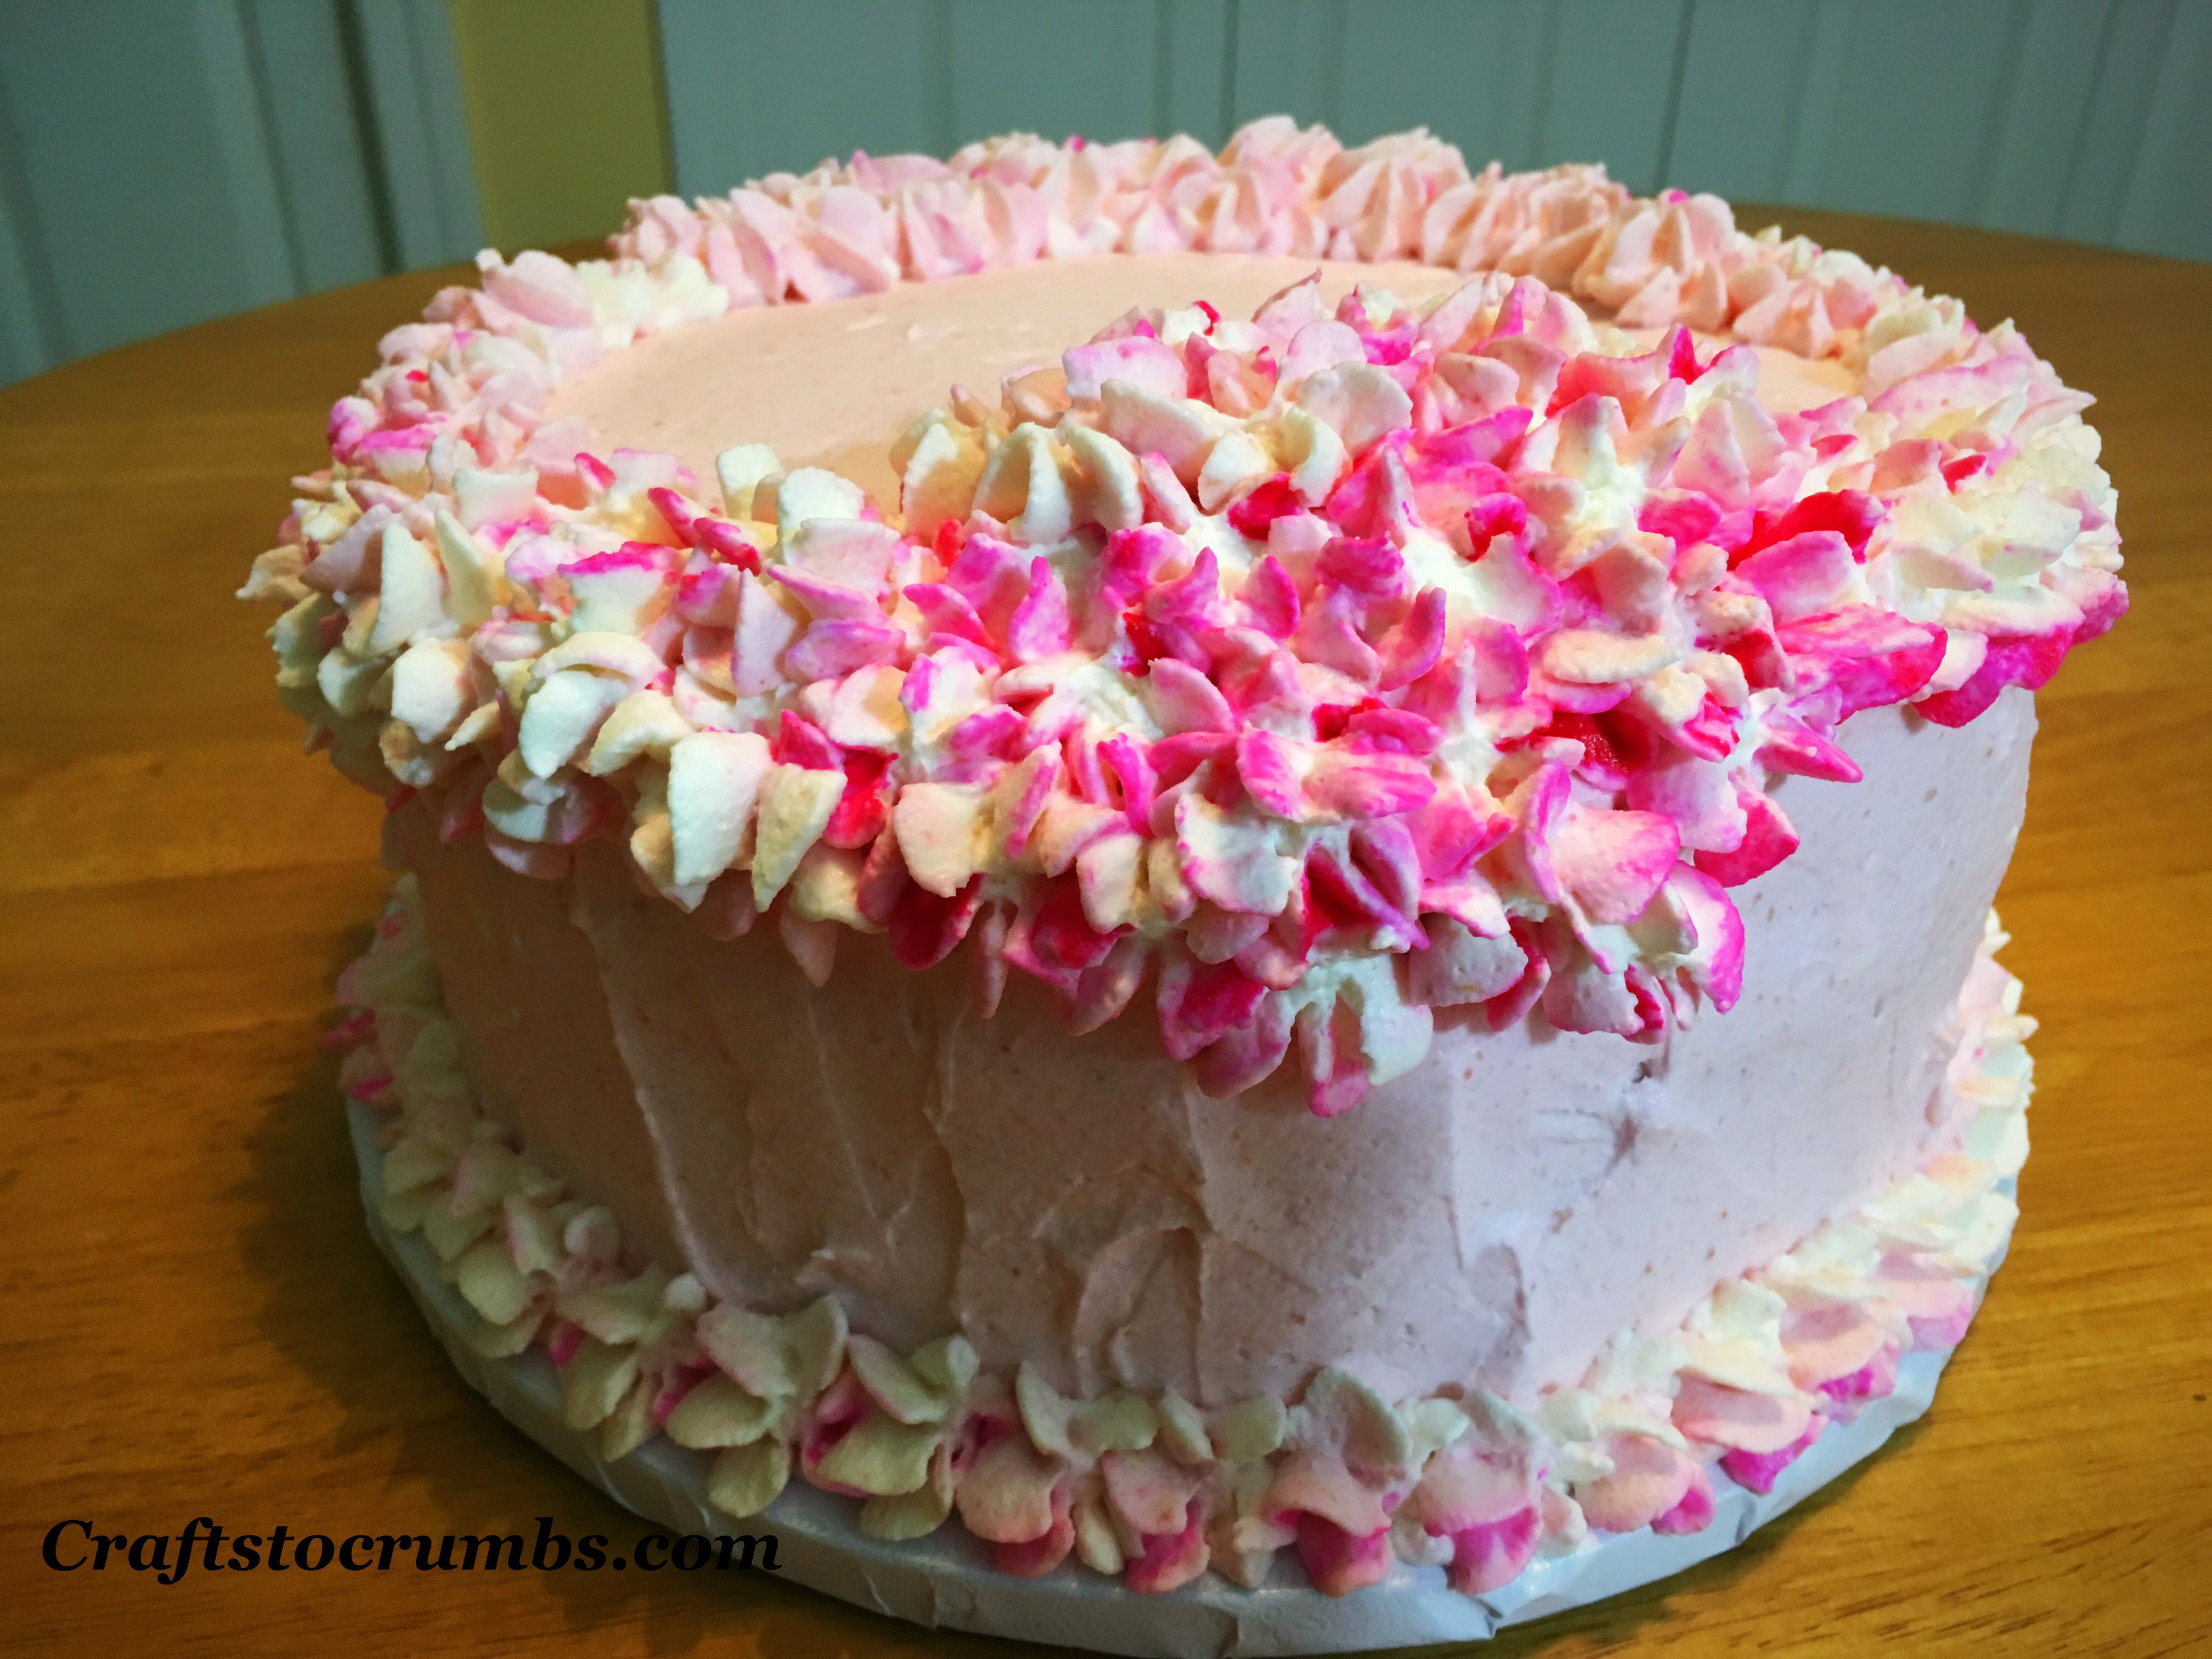 Crafts to Crumbs Guava Cake